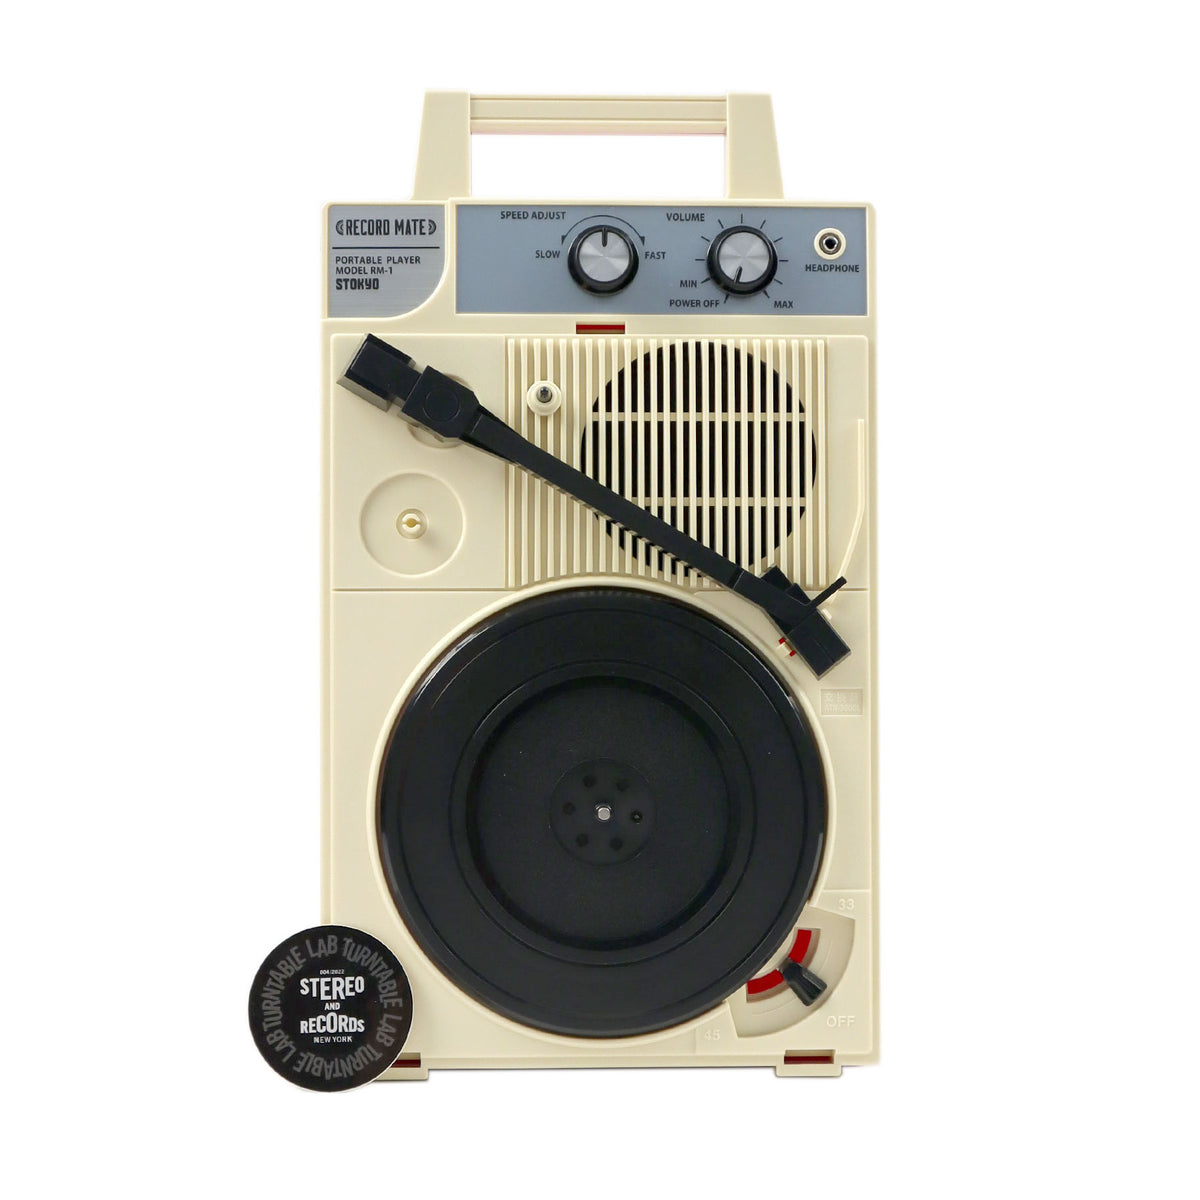 National portable record player S F-321 Record Player Portable Turntable